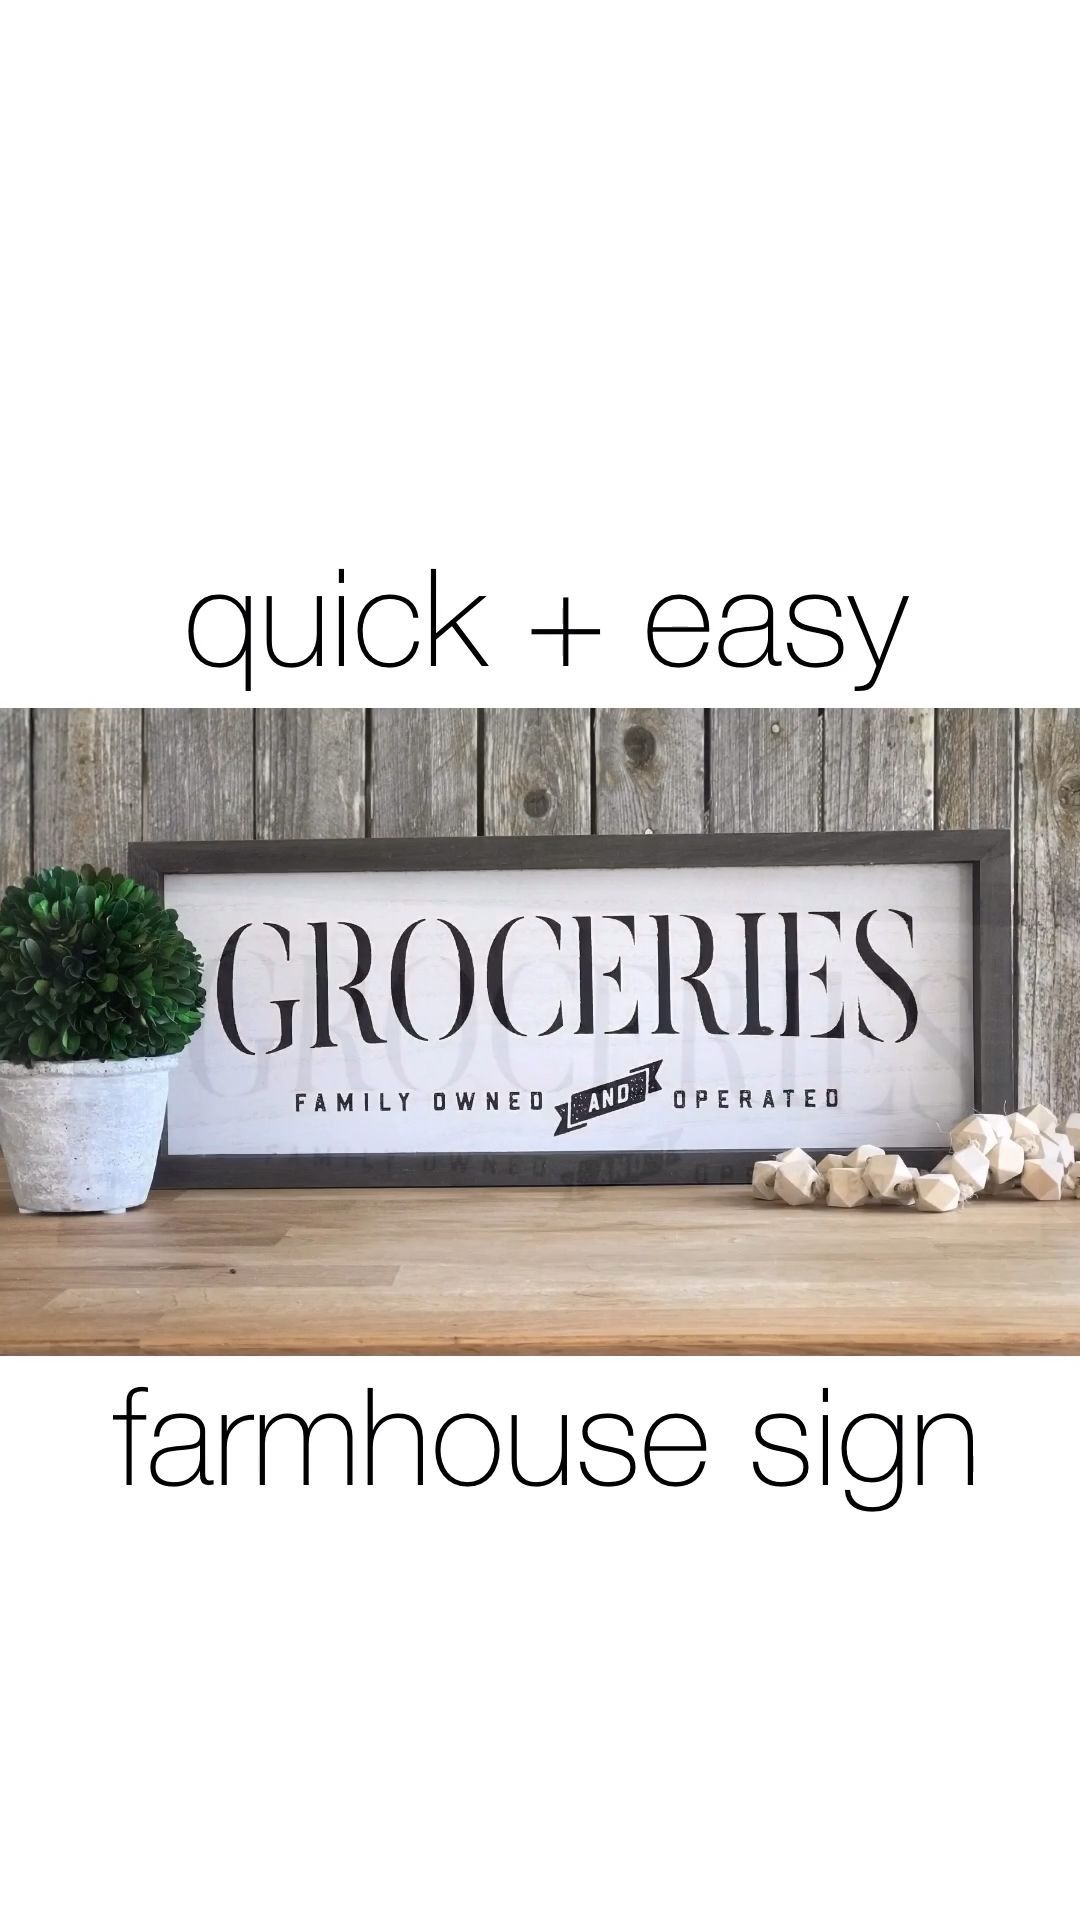 DIY FARMHOUSE STYLE SIGN -   20 diy projects Videos kitchen ideas